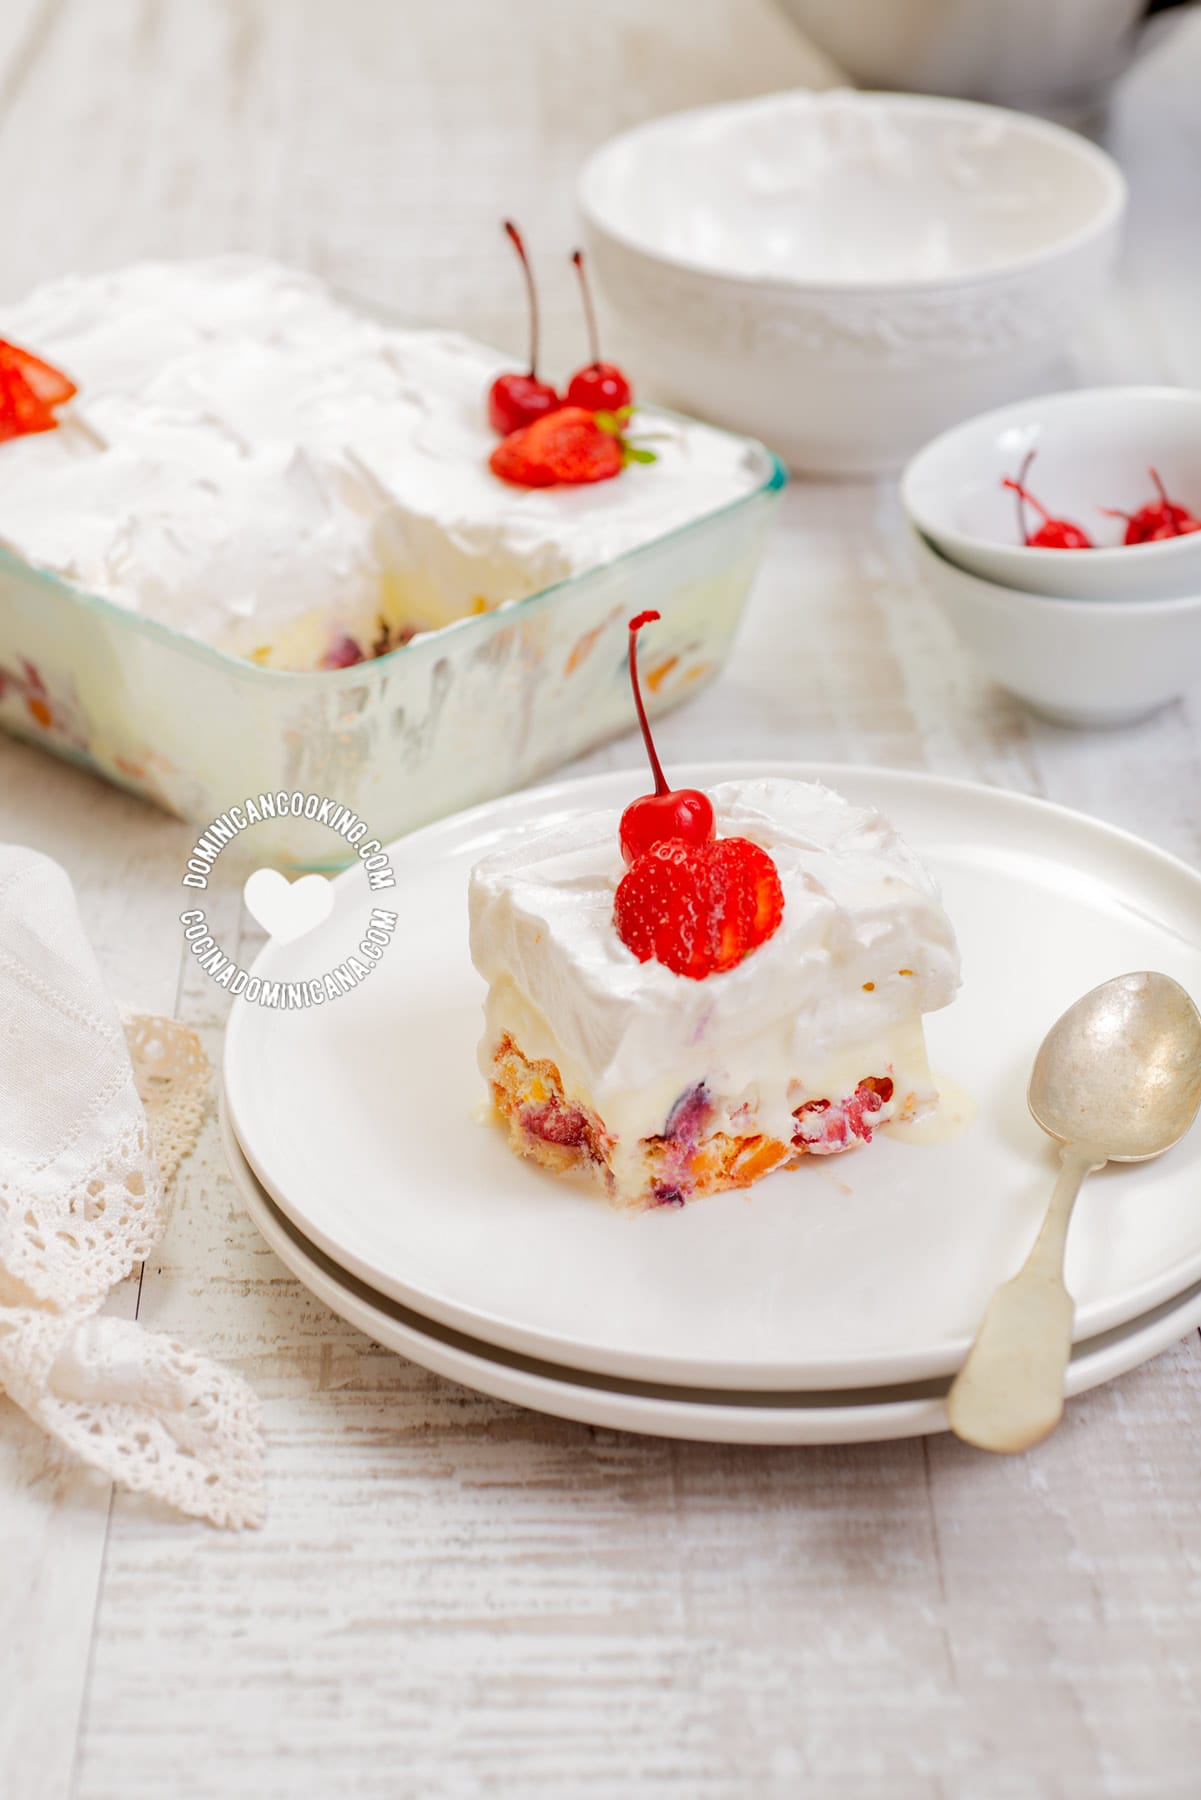 Ice cream trifle with fruits and ladyfingers